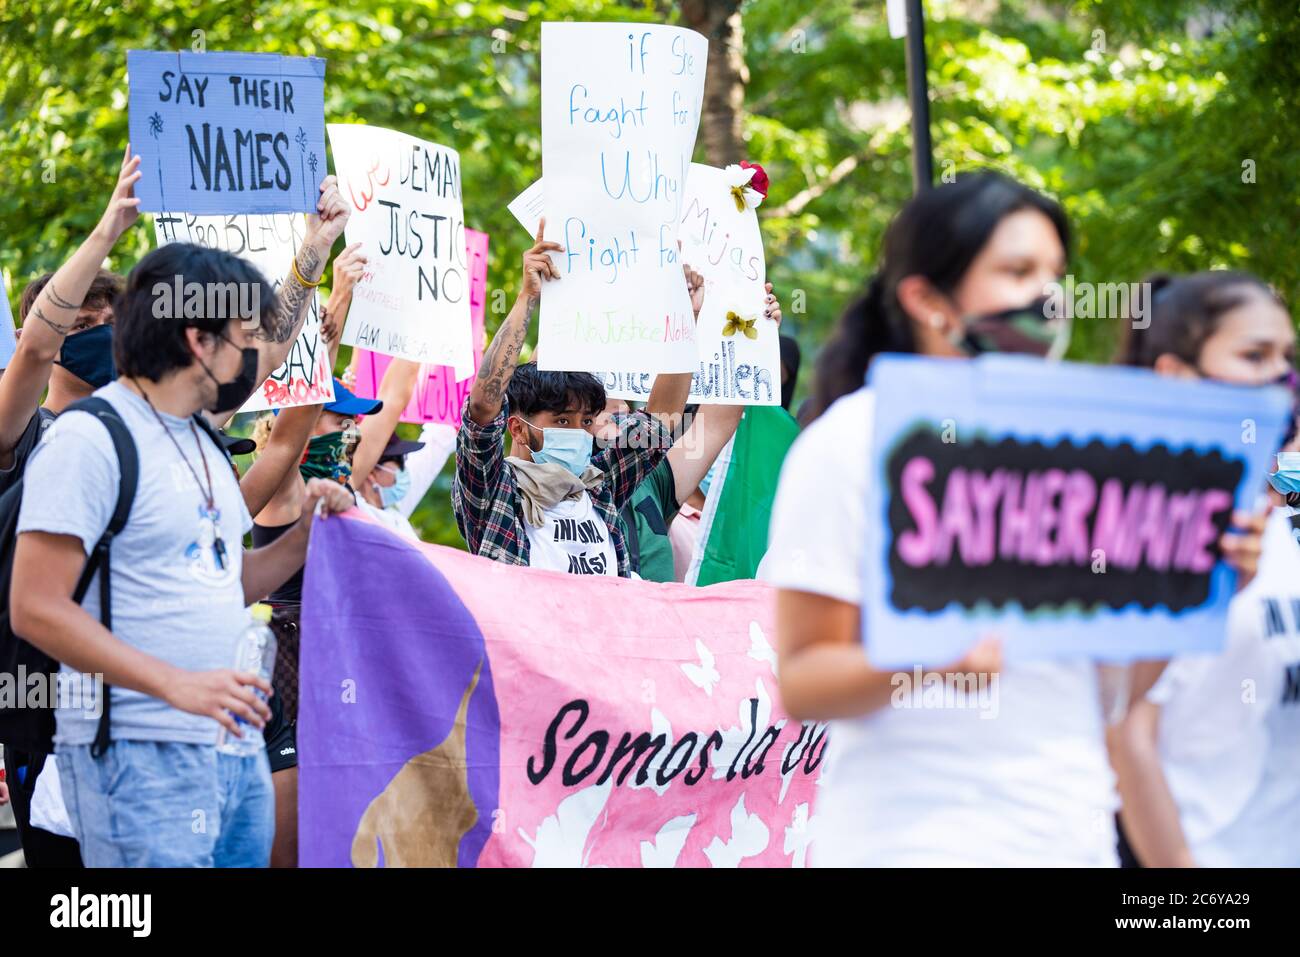 Philadelphia / USA. About one hundred people joined a march in Center City organized by Philadephia Latinx organizatoin, Juntos. Beginning at City Hall, the march progressed on Ben Franklin Boulevard and ended at the Art Museum. July 12, 2020. Credit: Christopher Evens / Alamy Live News Stock Photo